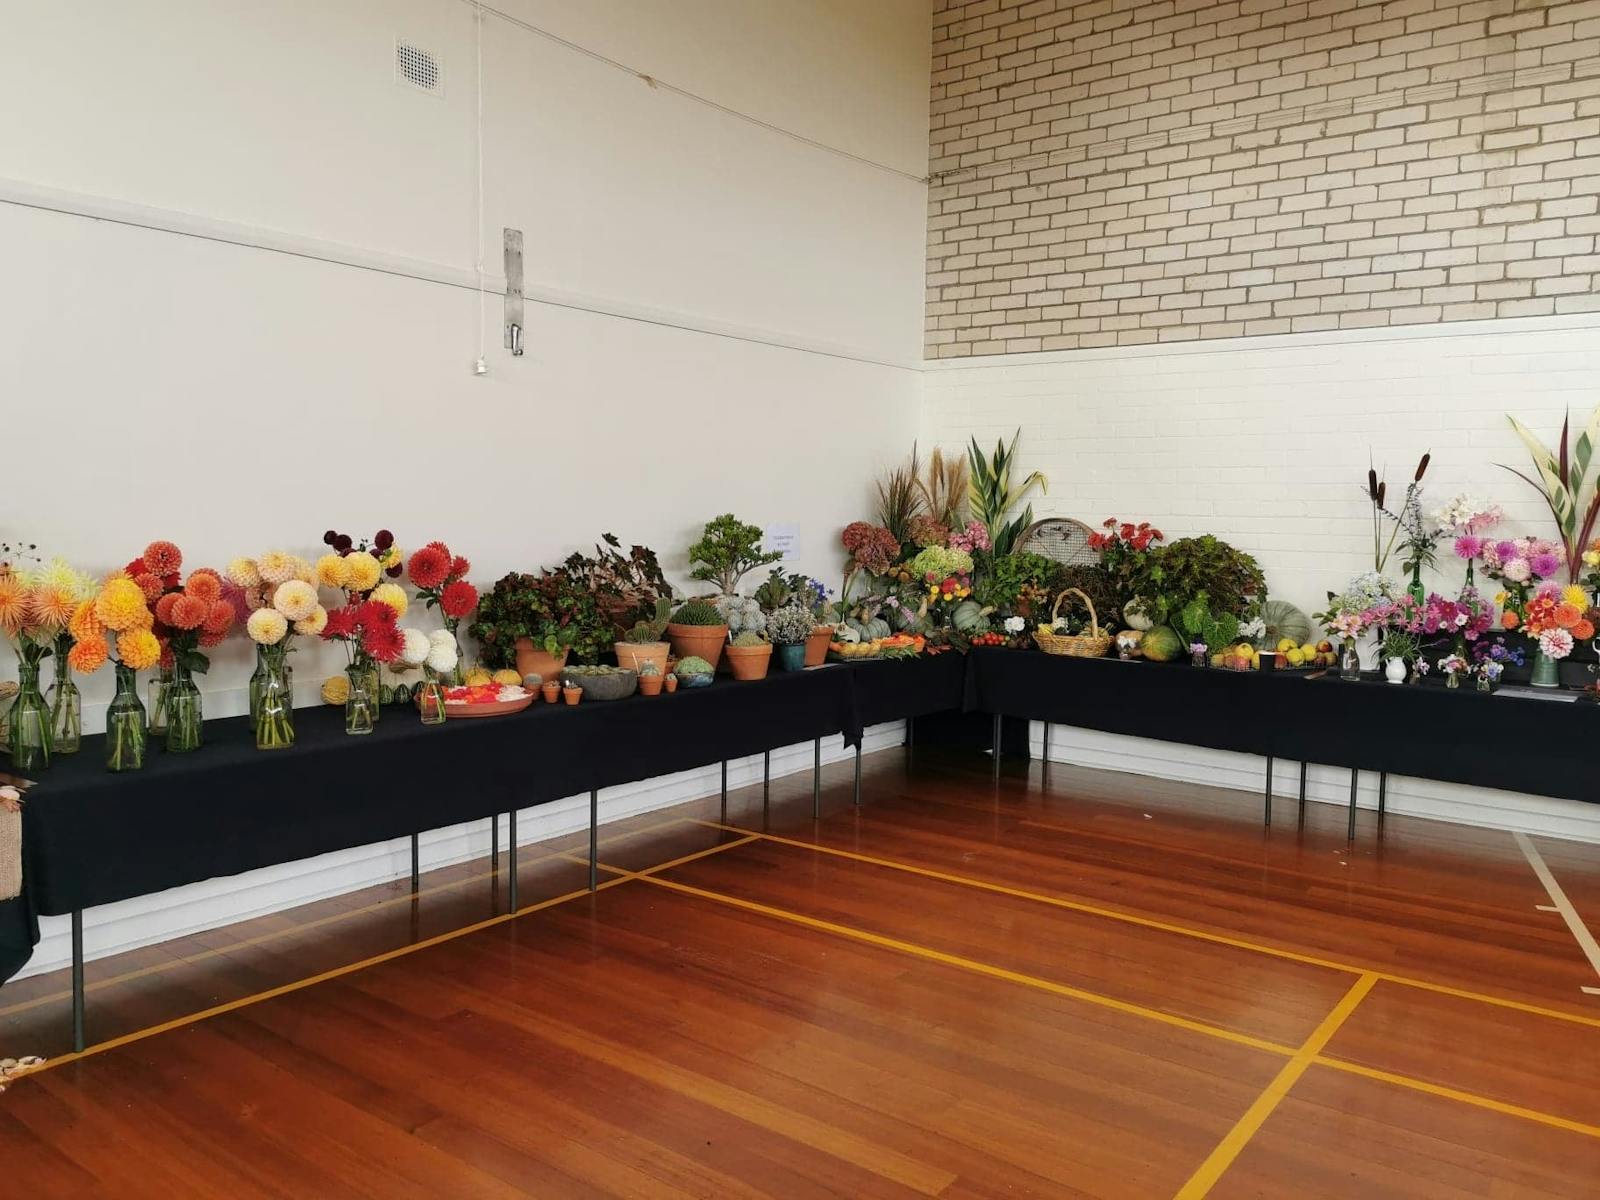 Flowers in a hall at Launceston Horticultural Society's seasonal flower show